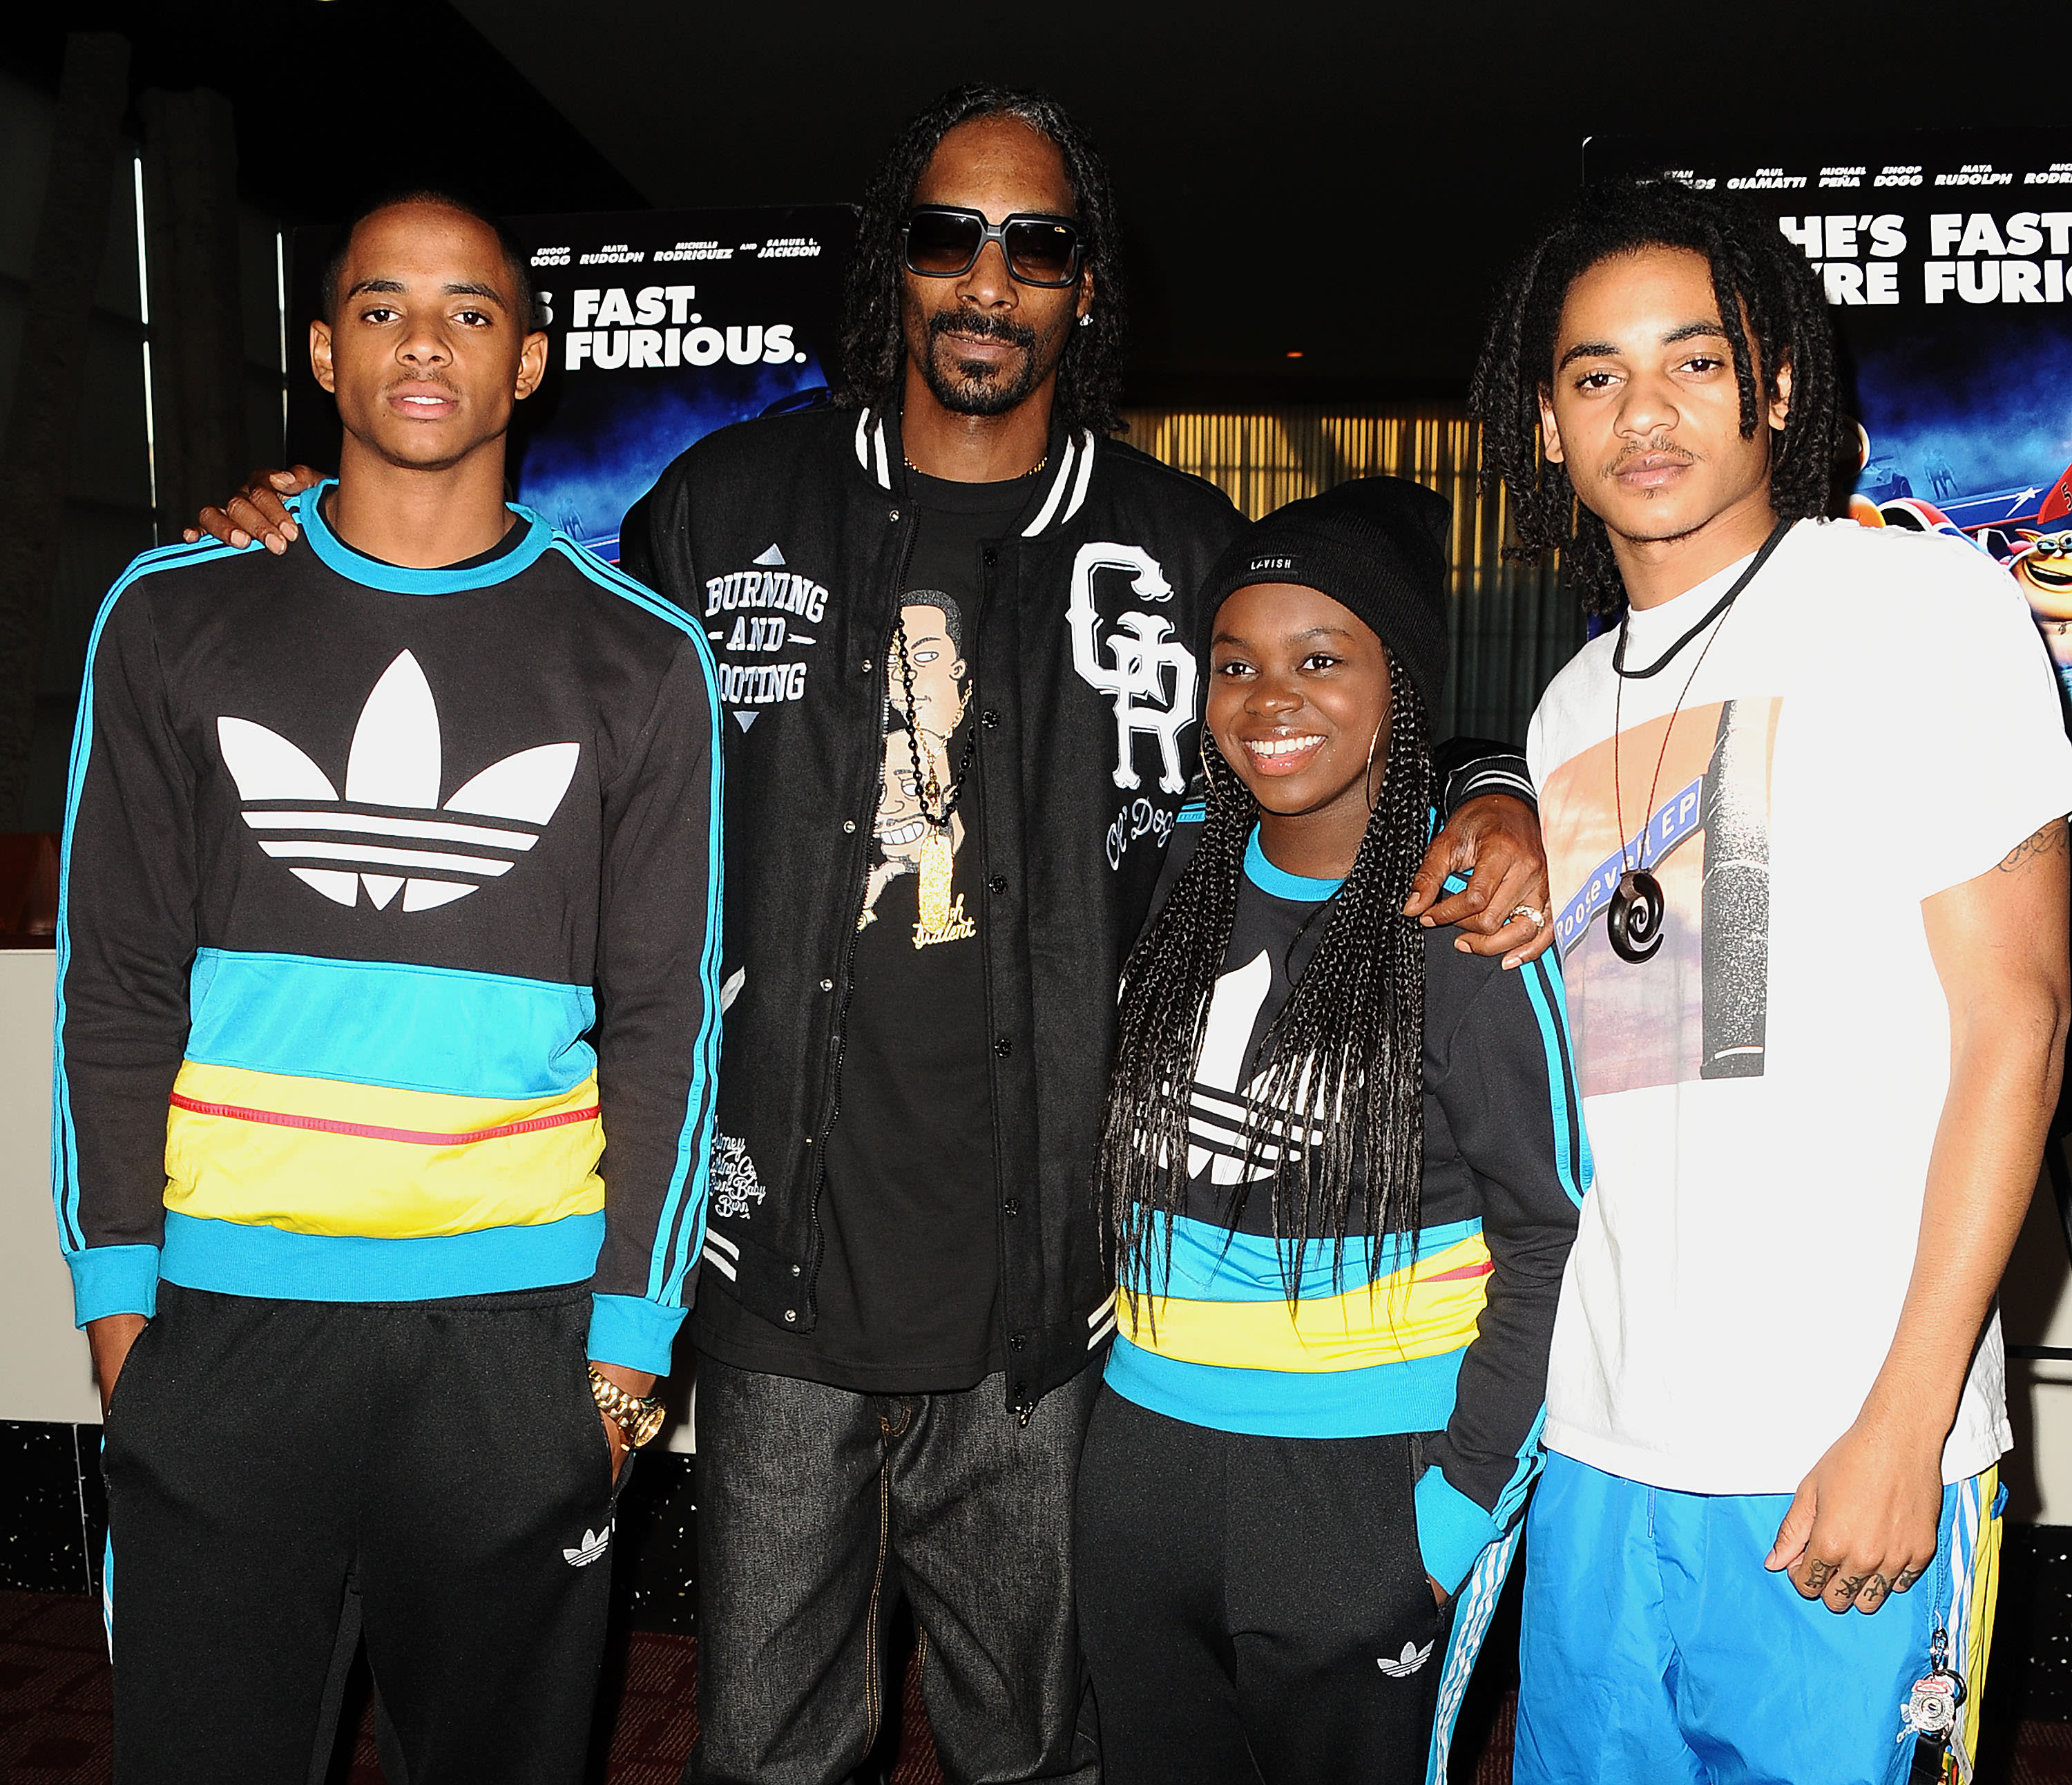 Snoop Dogg Is the Proud Father to 4 Kids: Meet the Rapper’s Sons and Daughter